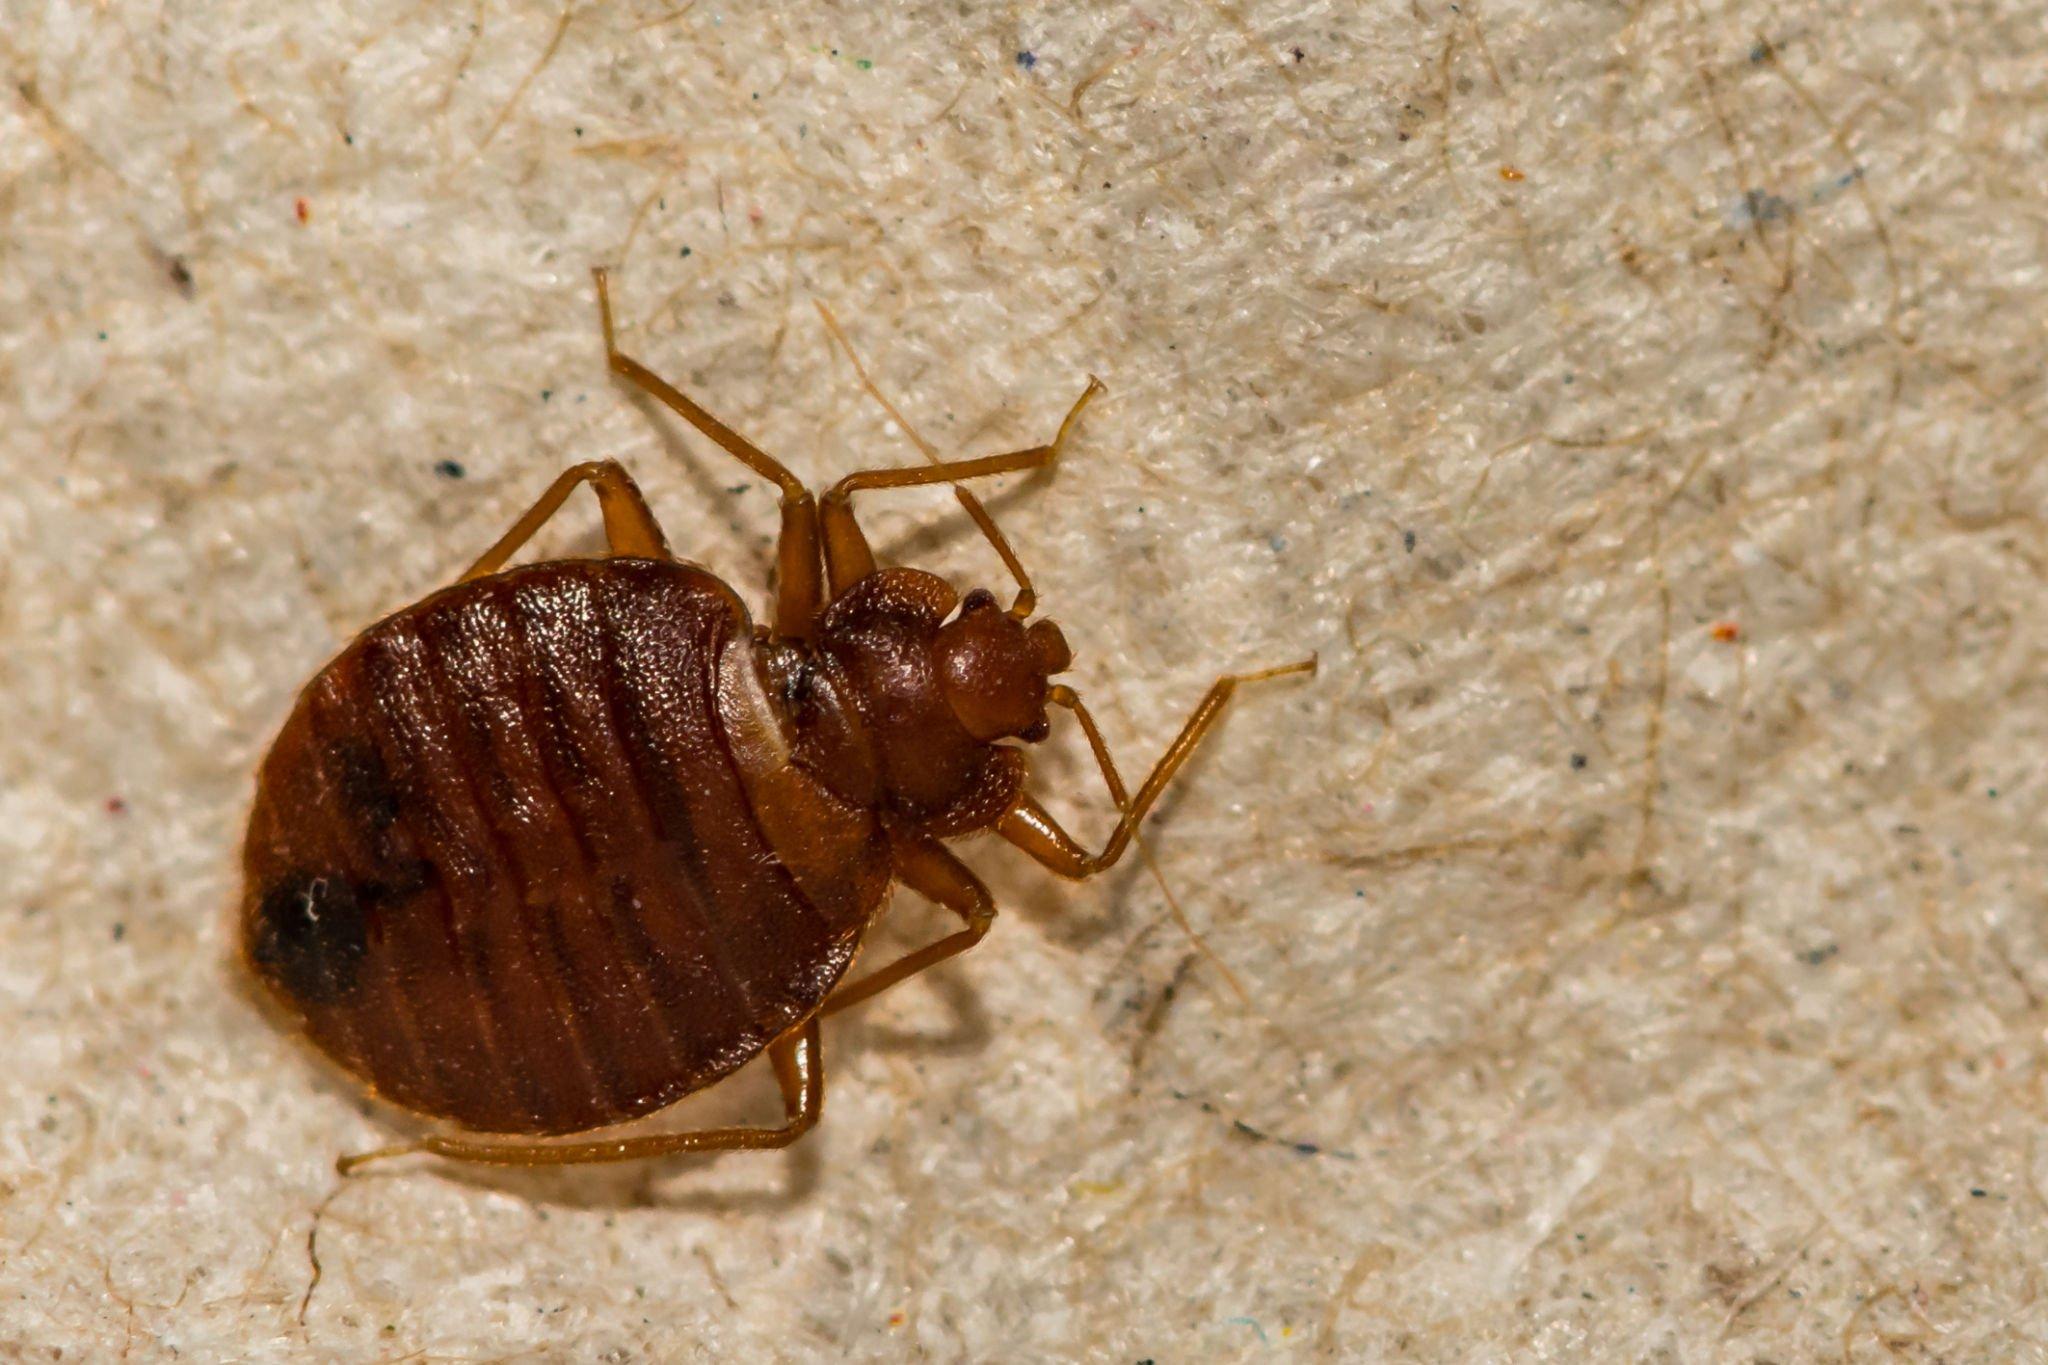 Where do Bed Bugs come from,